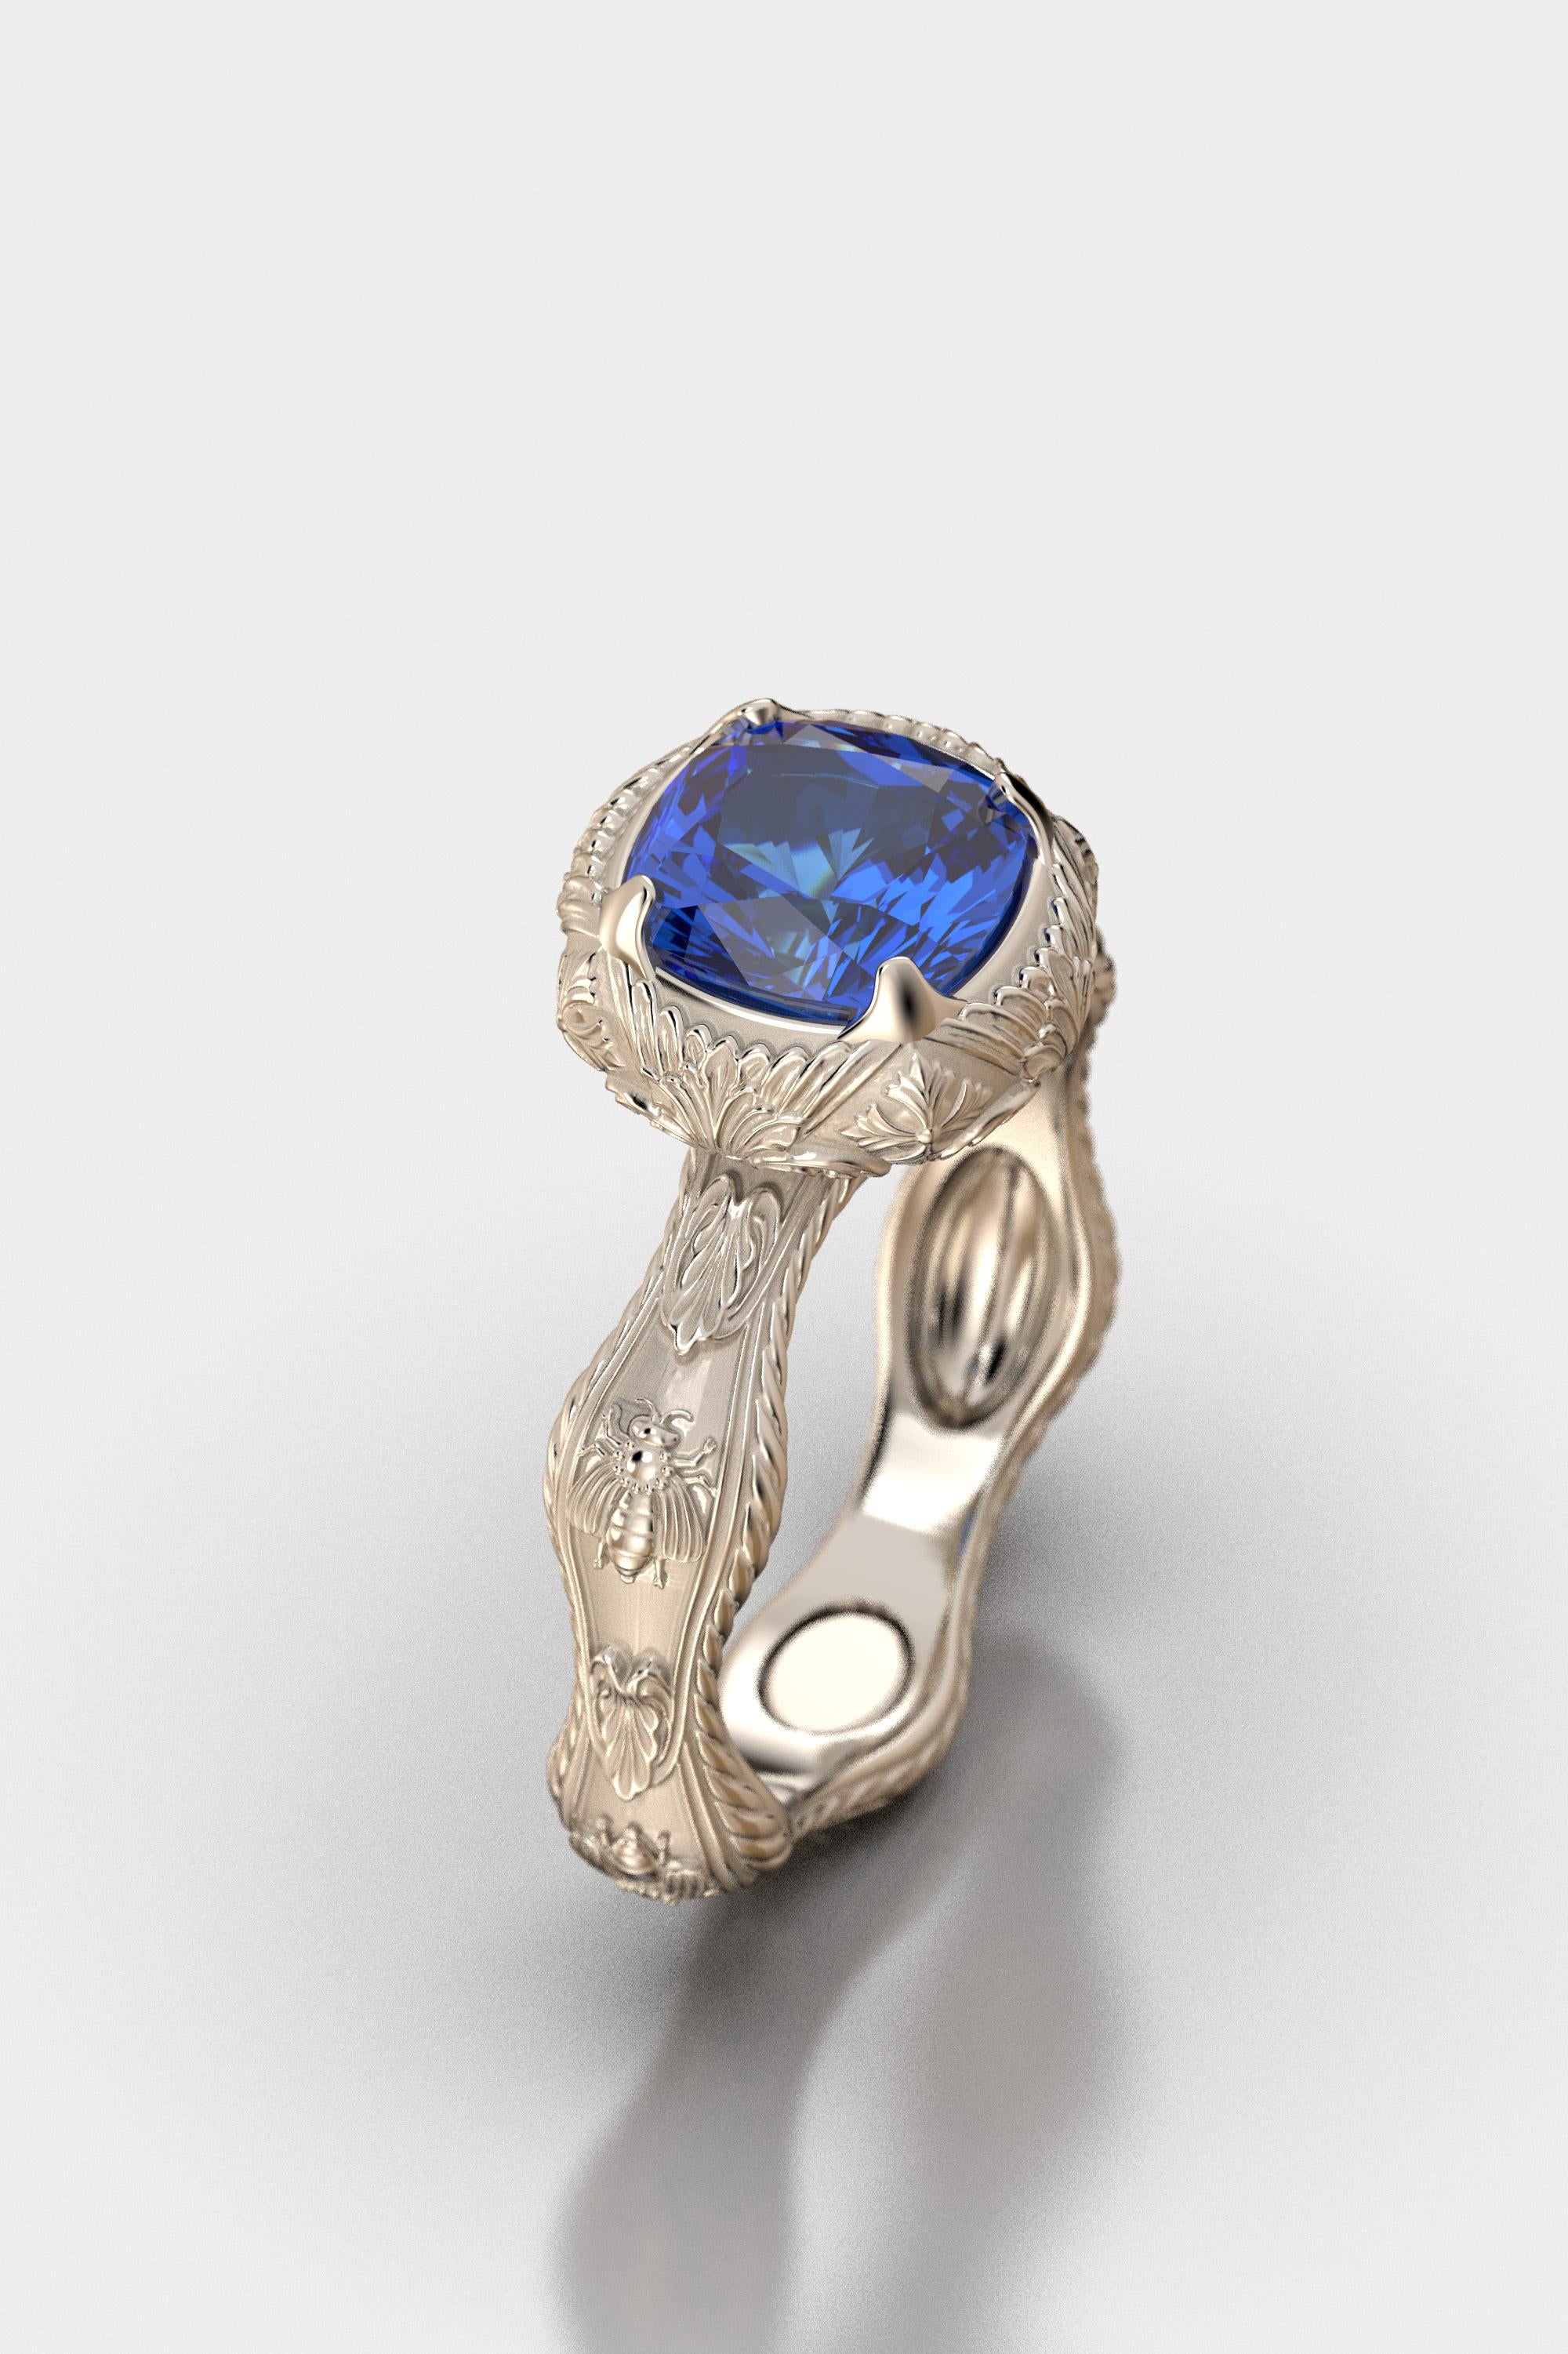 For Sale:  Tanzanite Ring Made In Italy by Oltremare Gioielli in 18k genuine gold 9